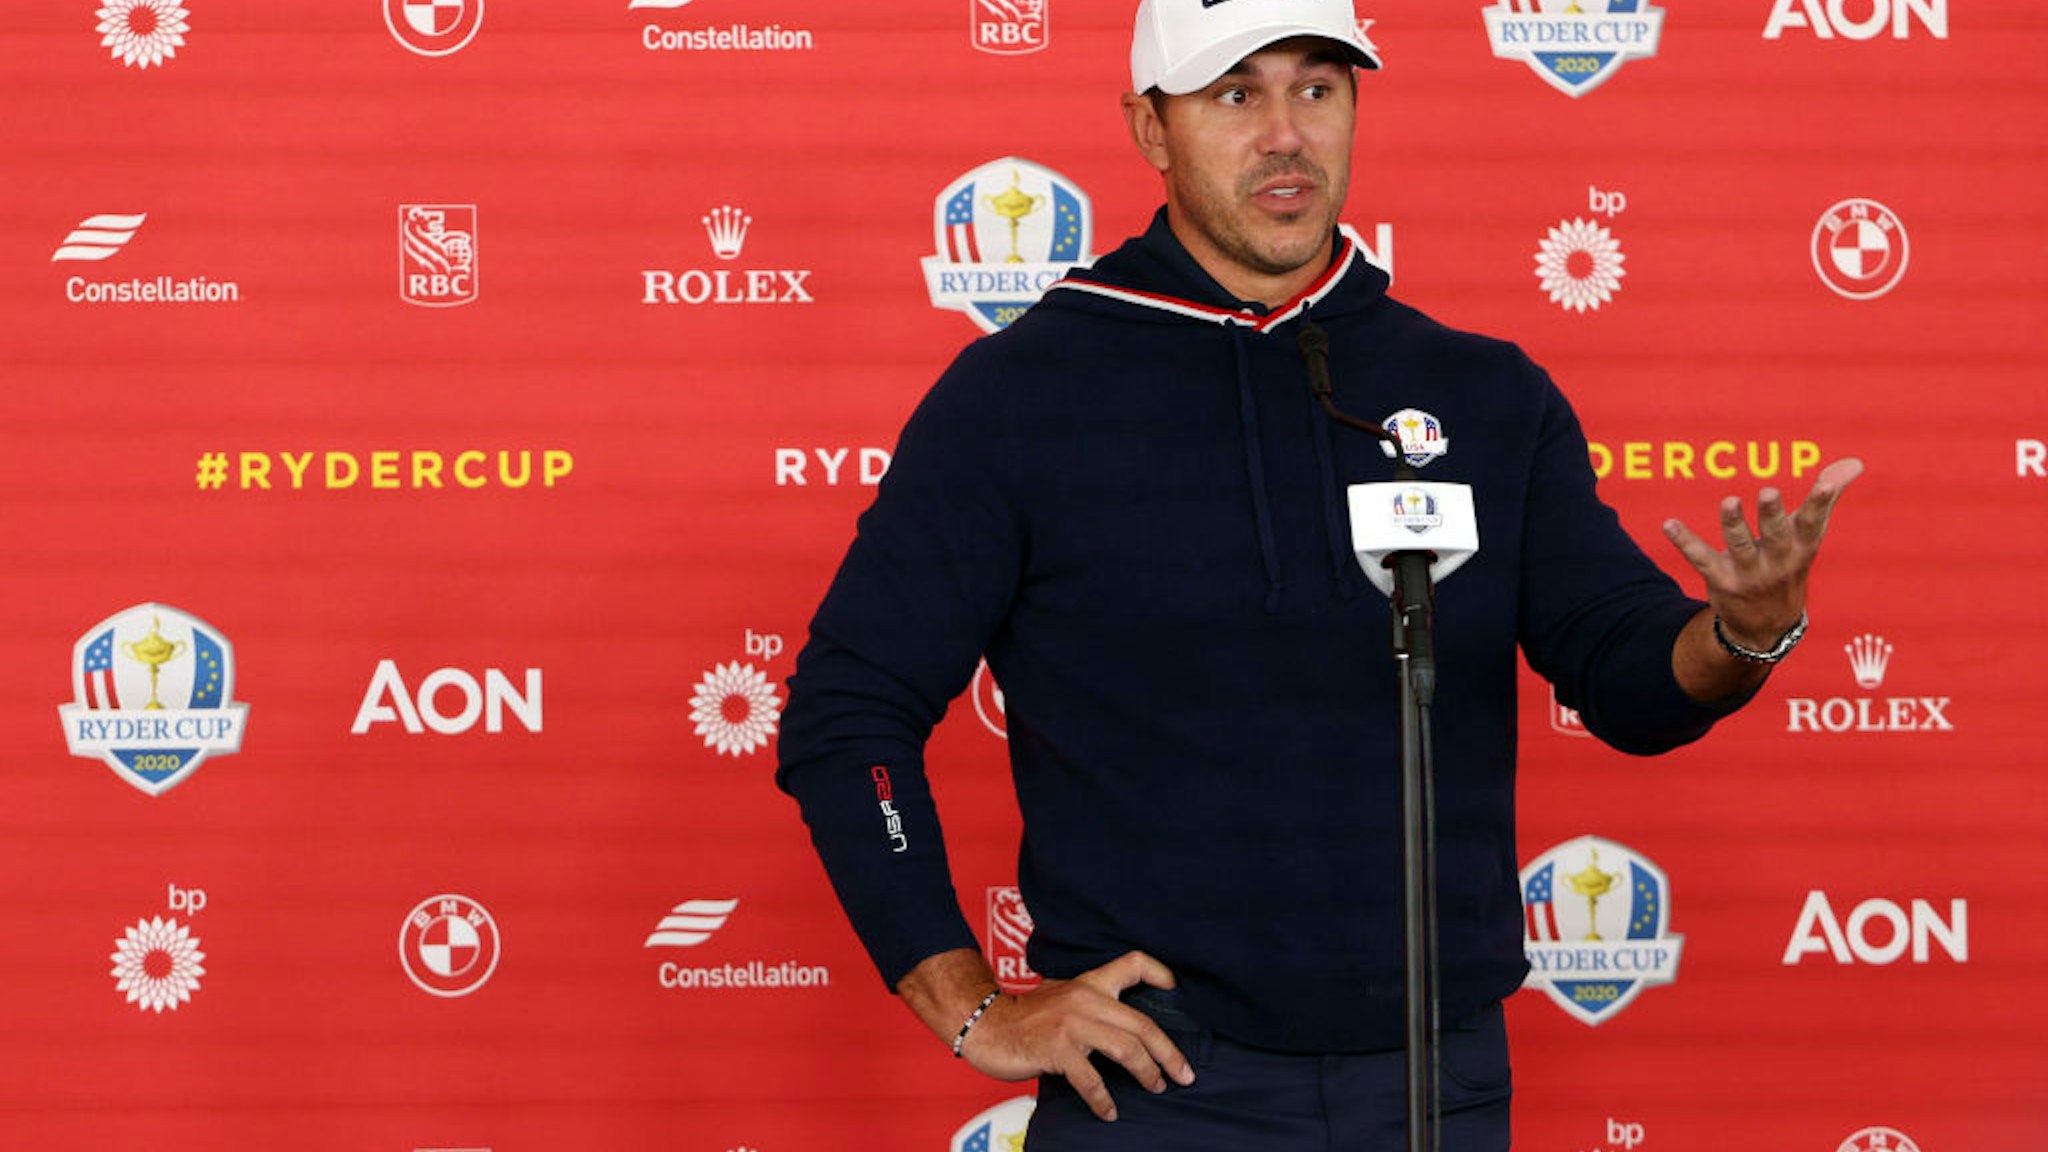 KOHLER, WISCONSIN - SEPTEMBER 23: Brooks Koepka of team United States speaks to the media during practice rounds prior to the 43rd Ryder Cup at Whistling Straits on September 23, 2021 in Kohler, Wisconsin. (Photo by Patrick Smith/Getty Images)